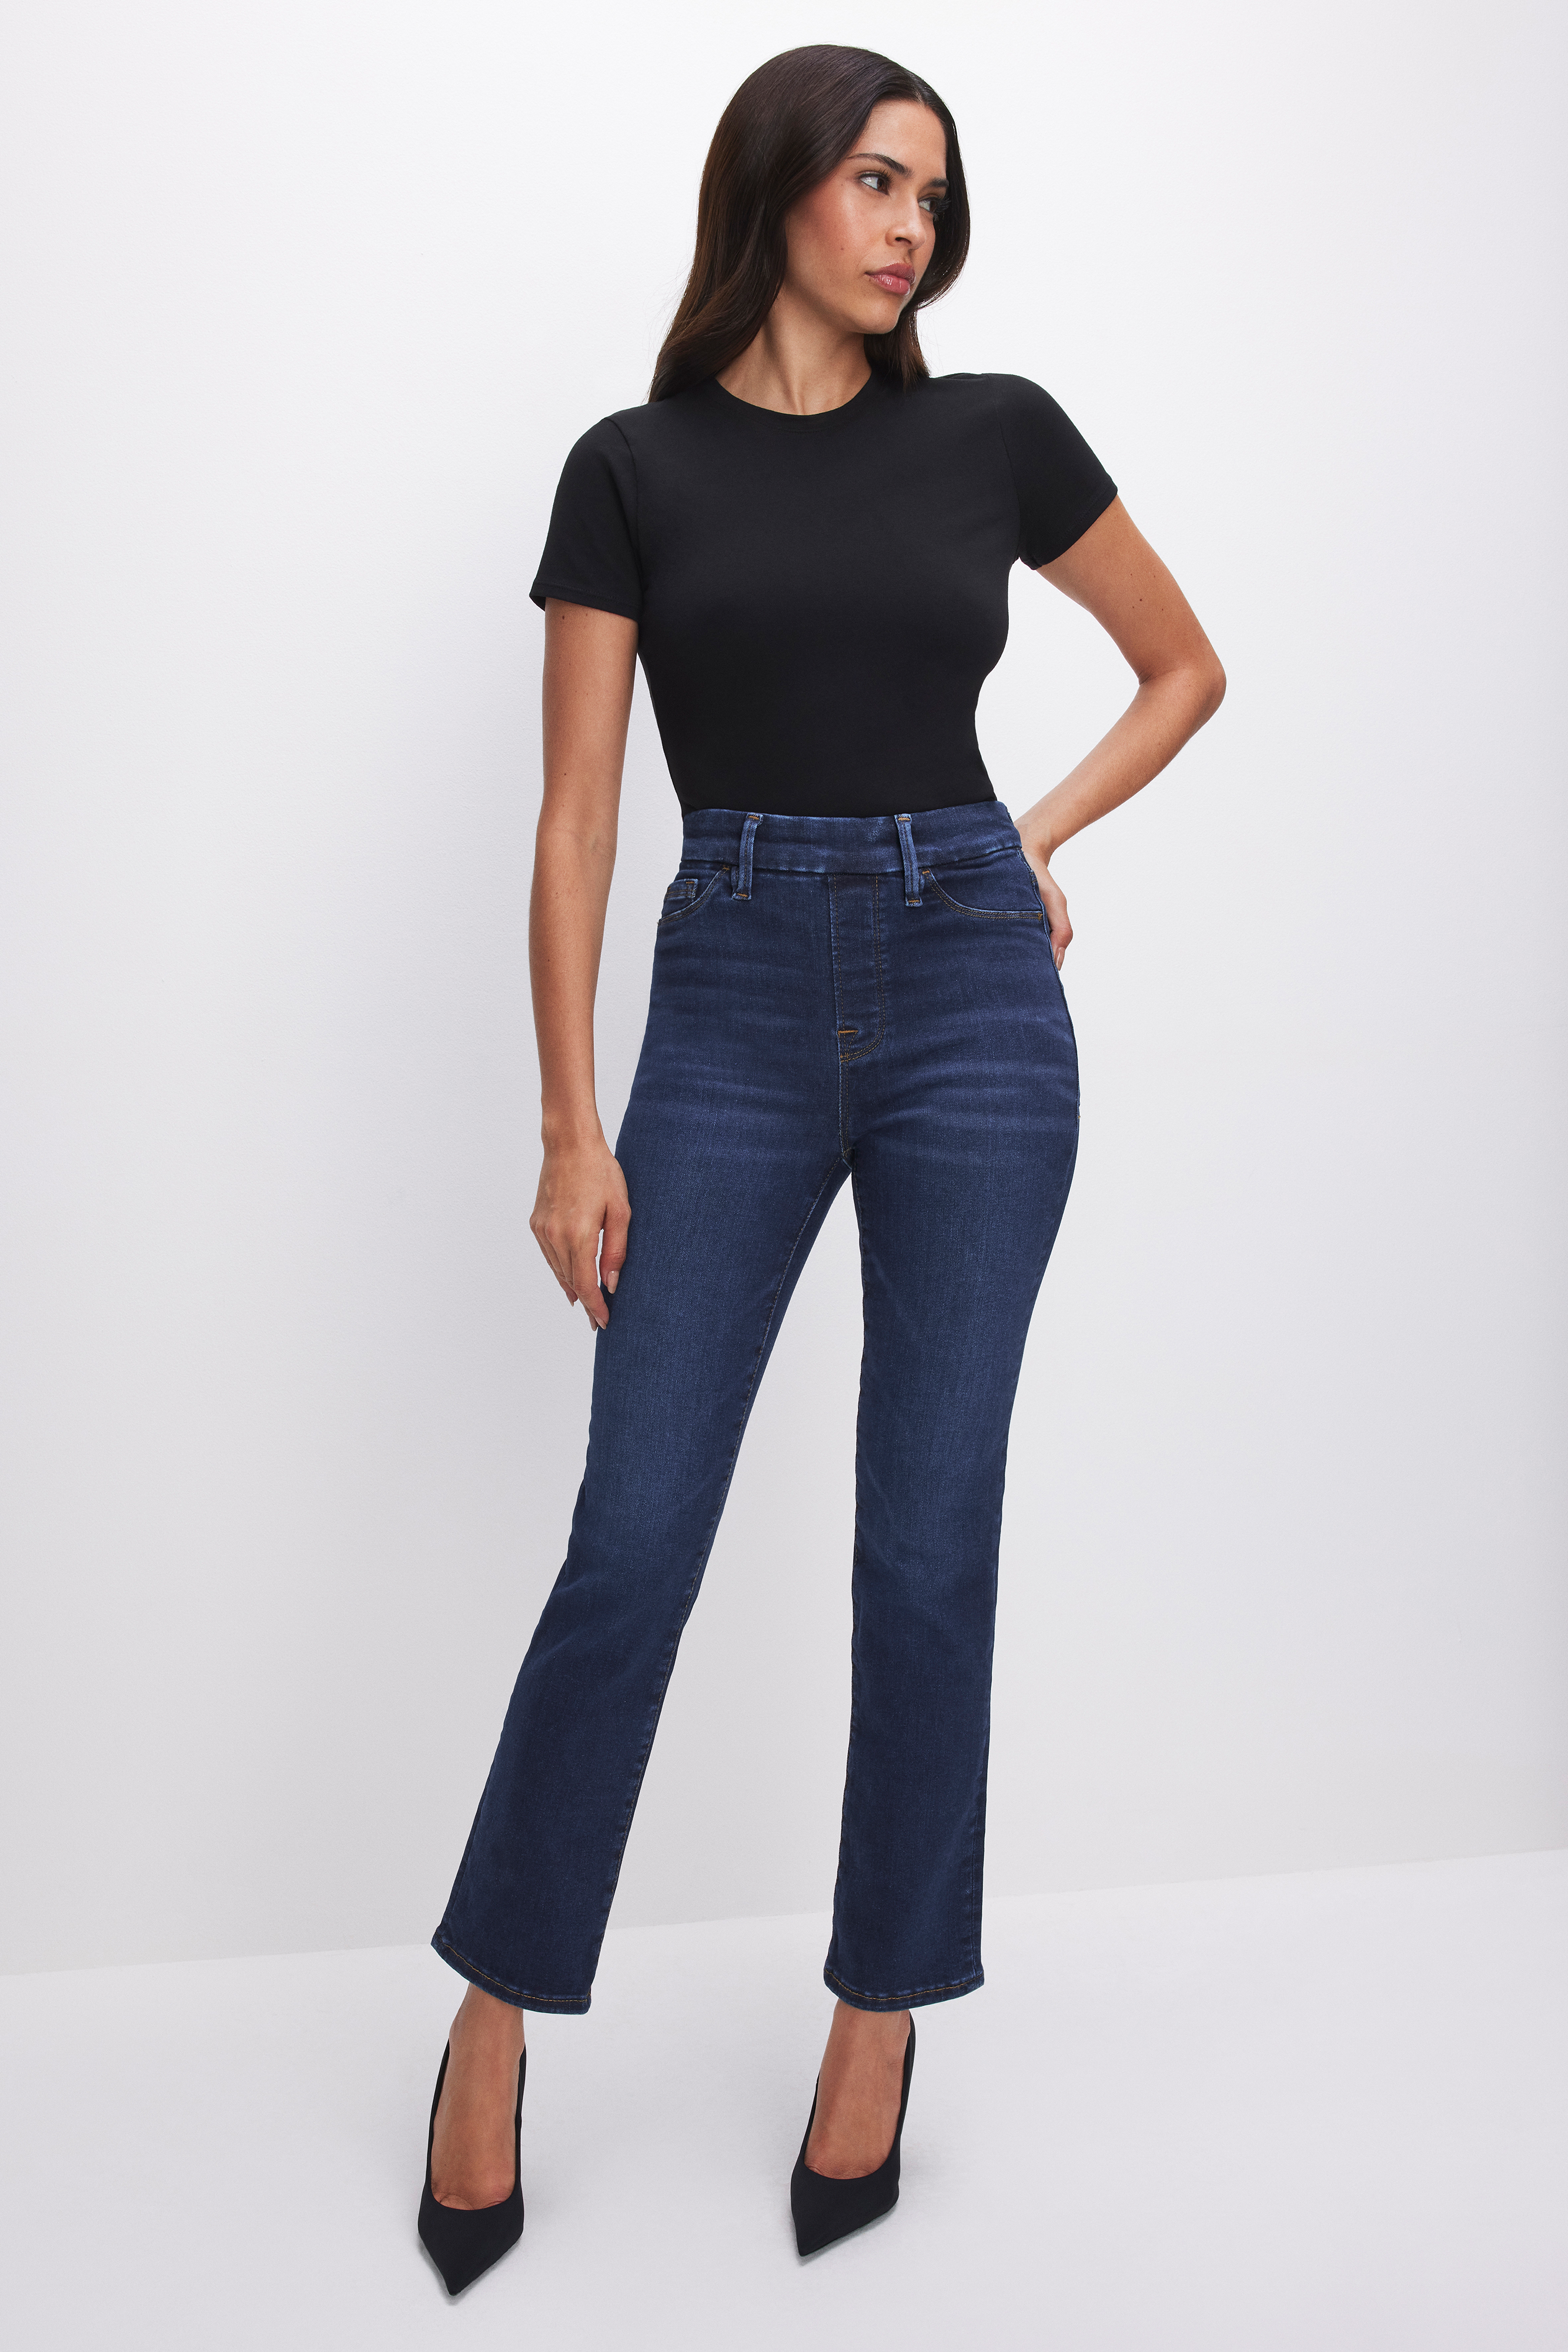 pull on stretch jeans